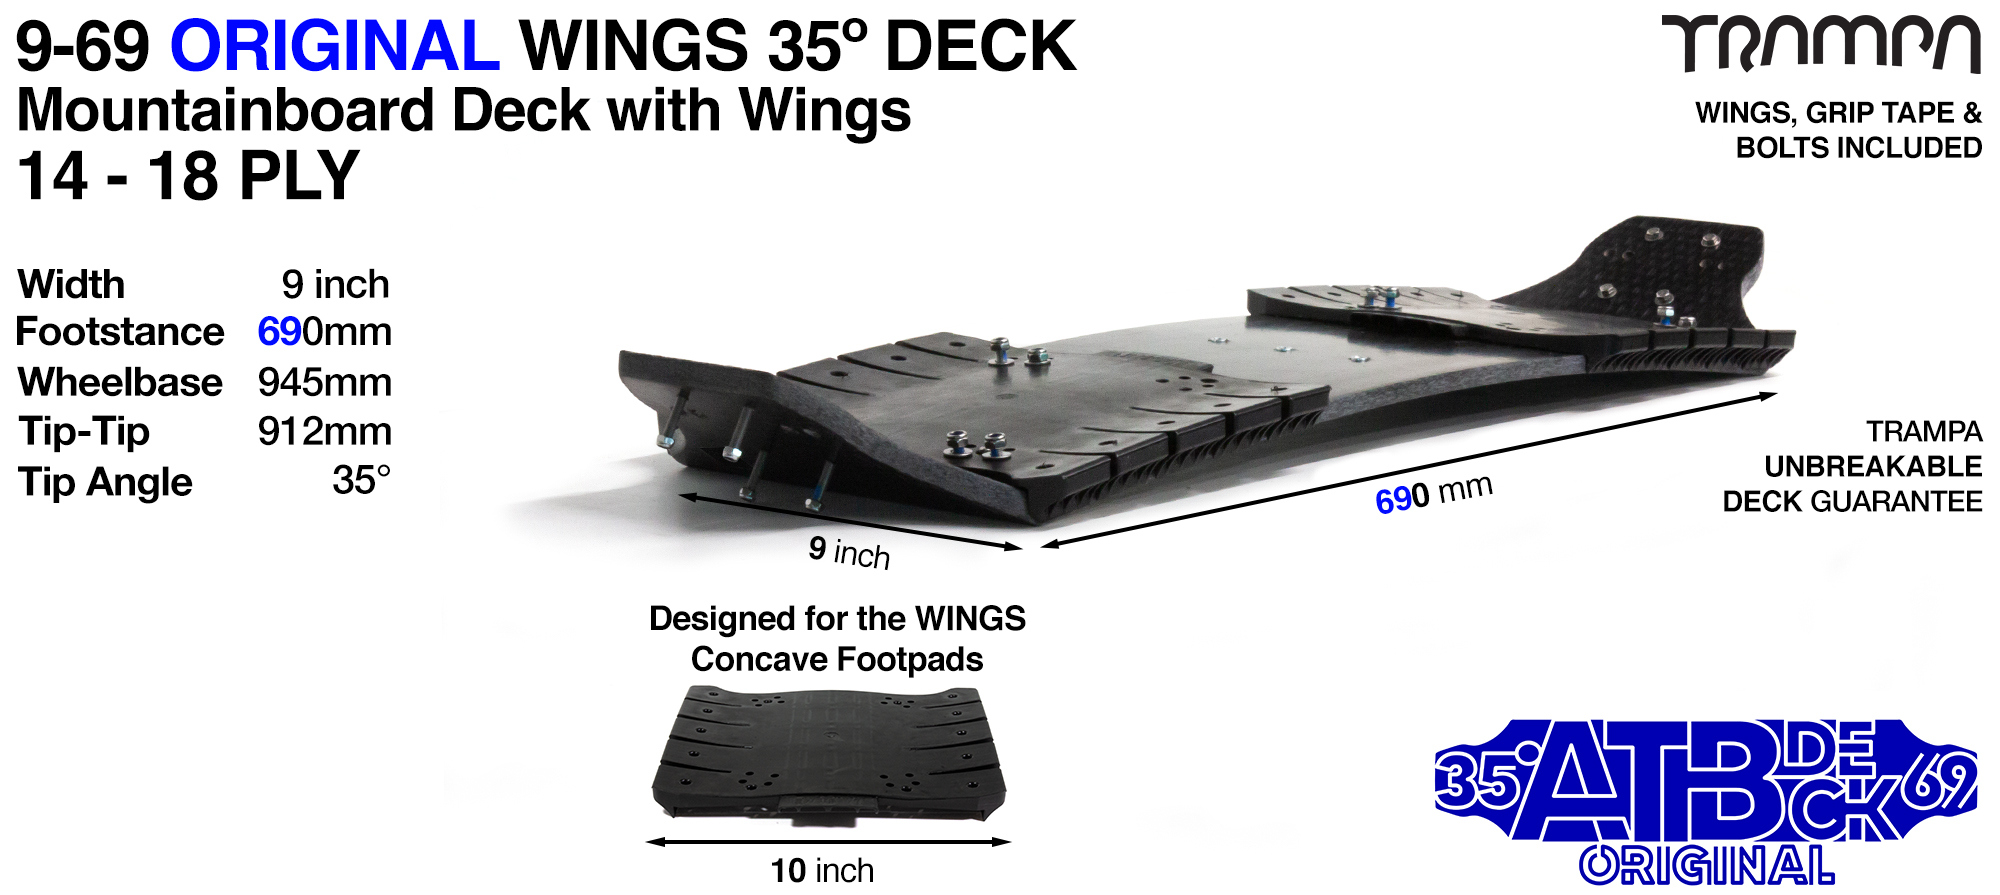 35° 9/69 Mountainboard Deck Fitted with WINGS (£235)